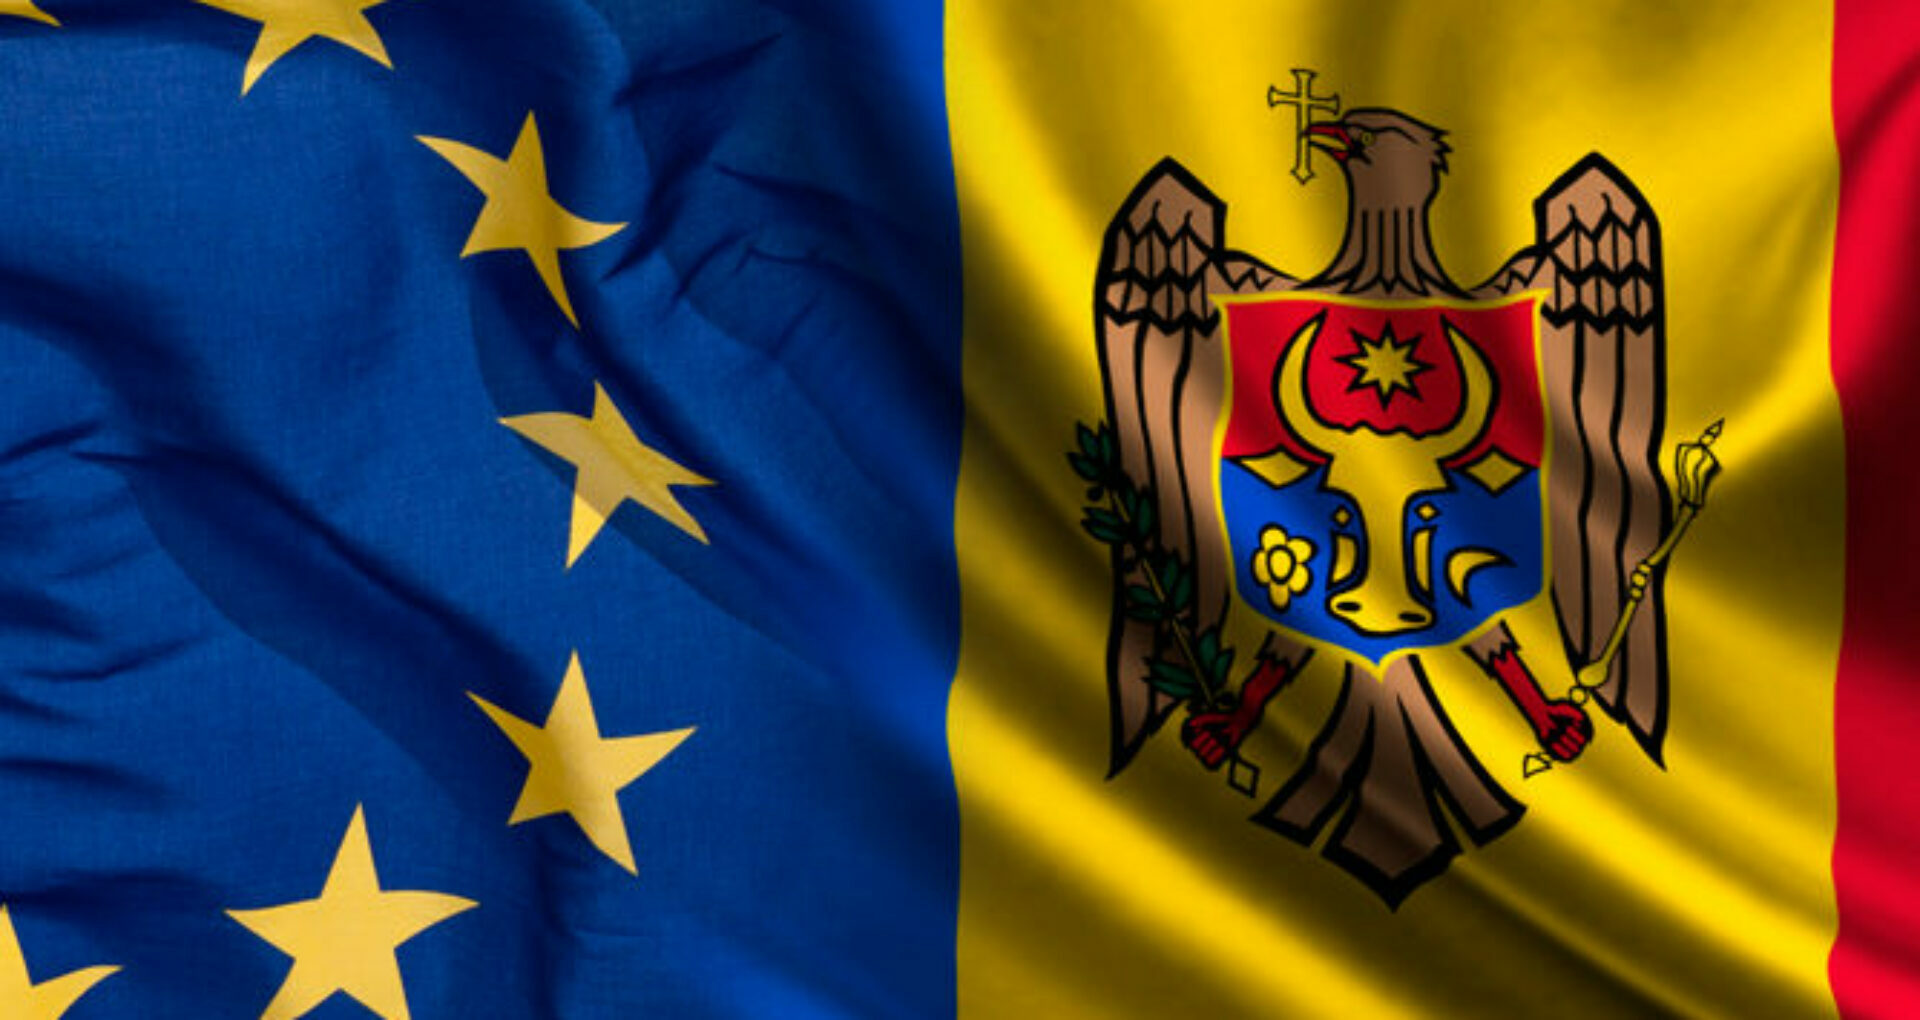 The European Commission Approved an Economic Recovery Plan for Moldova Worth 600 Million Euros